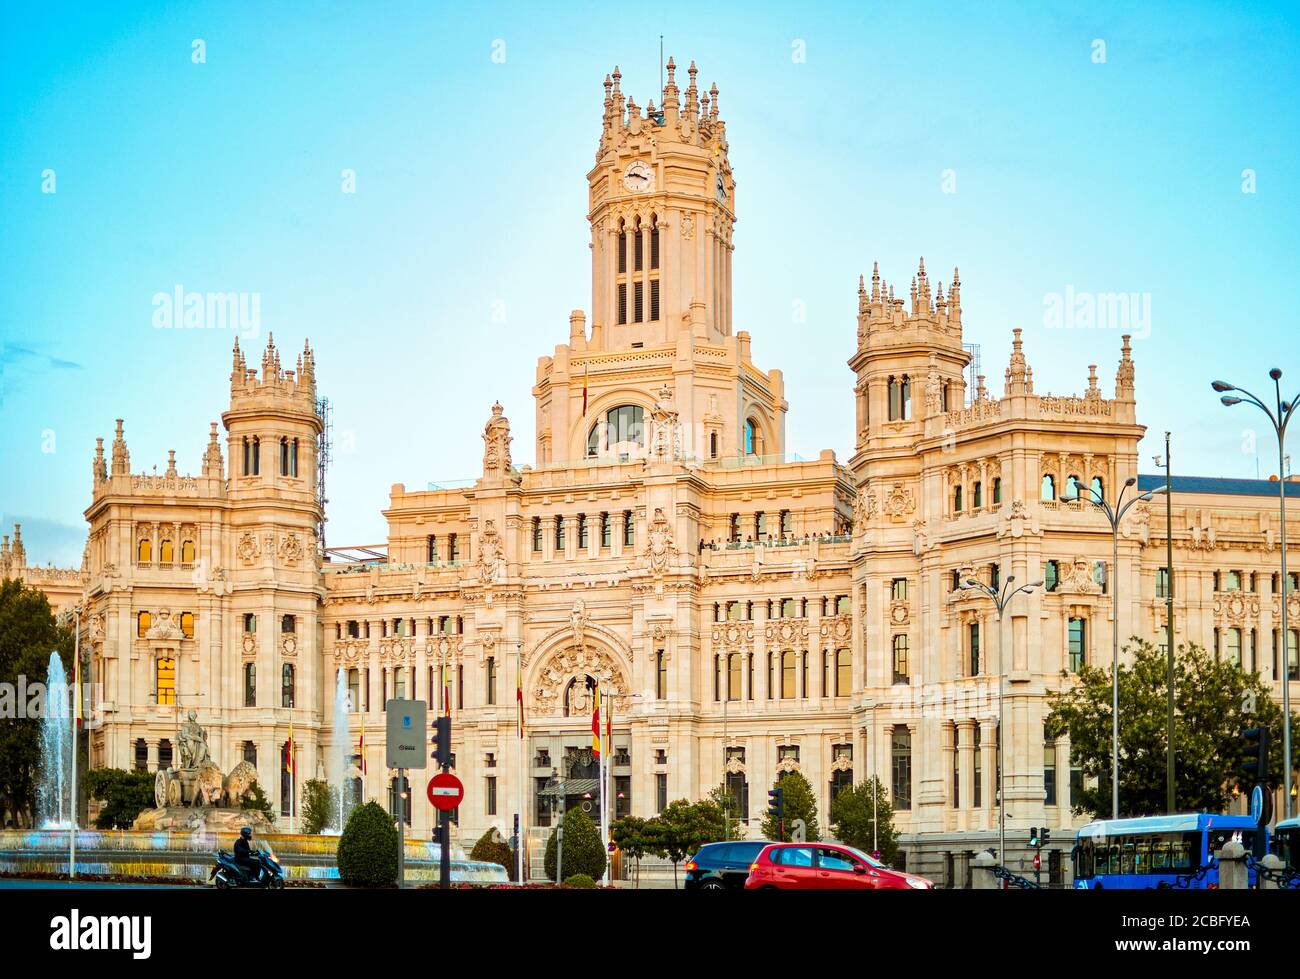 Palacio de Cibeles in the center of the city of Madrid in a summer sunset Stock Photo